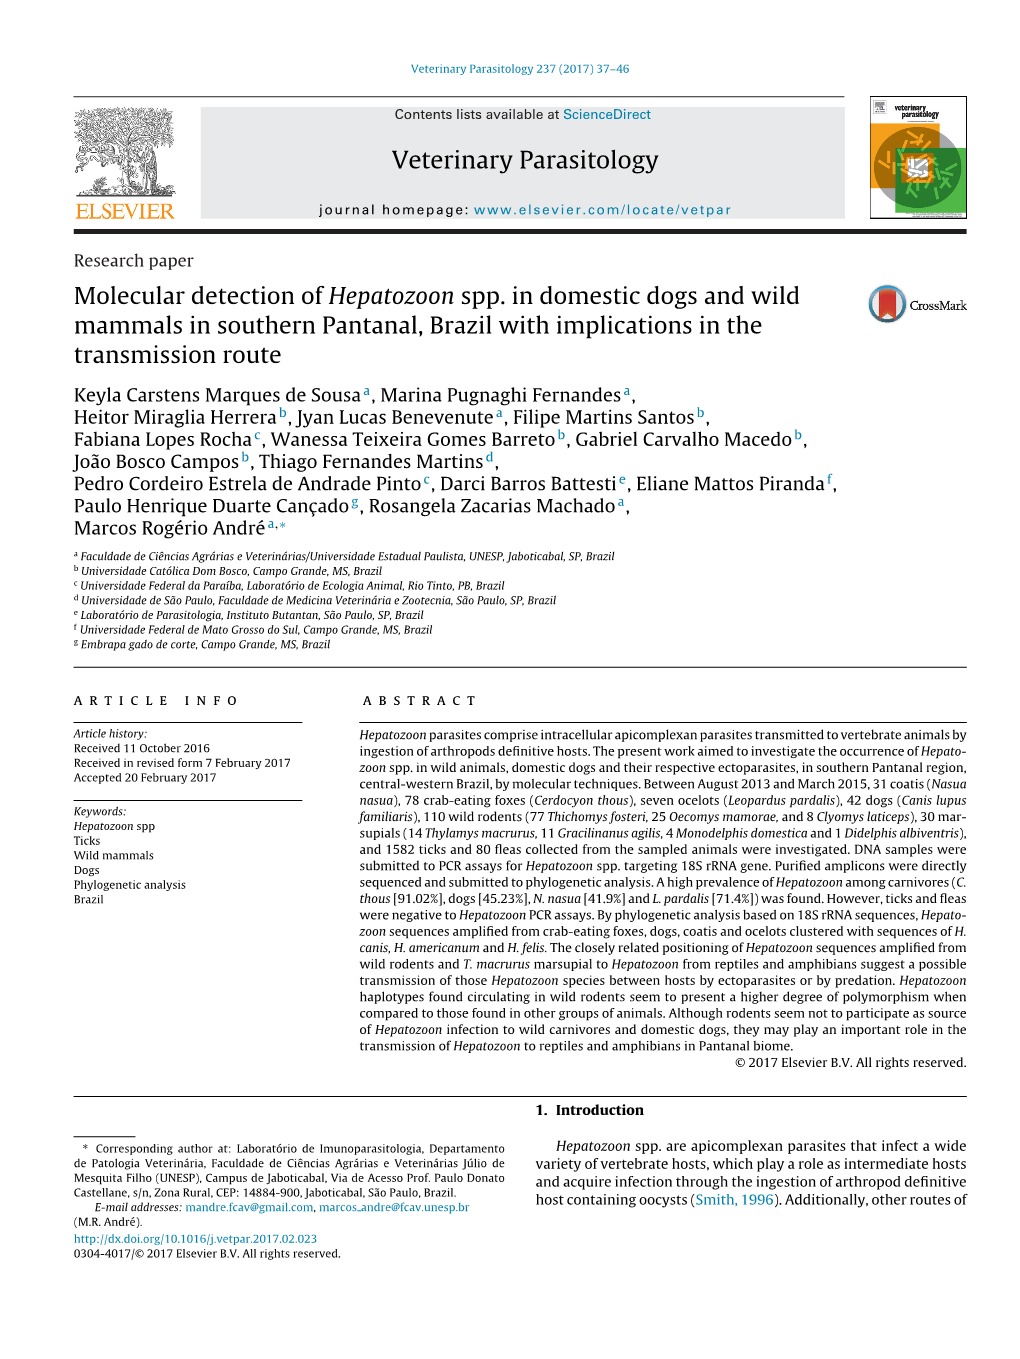 Molecular Detection of Hepatozoon Spp. in Domestic Dogs and Wild Mammals in Southern Pantanal, Brazil with Implications in the T